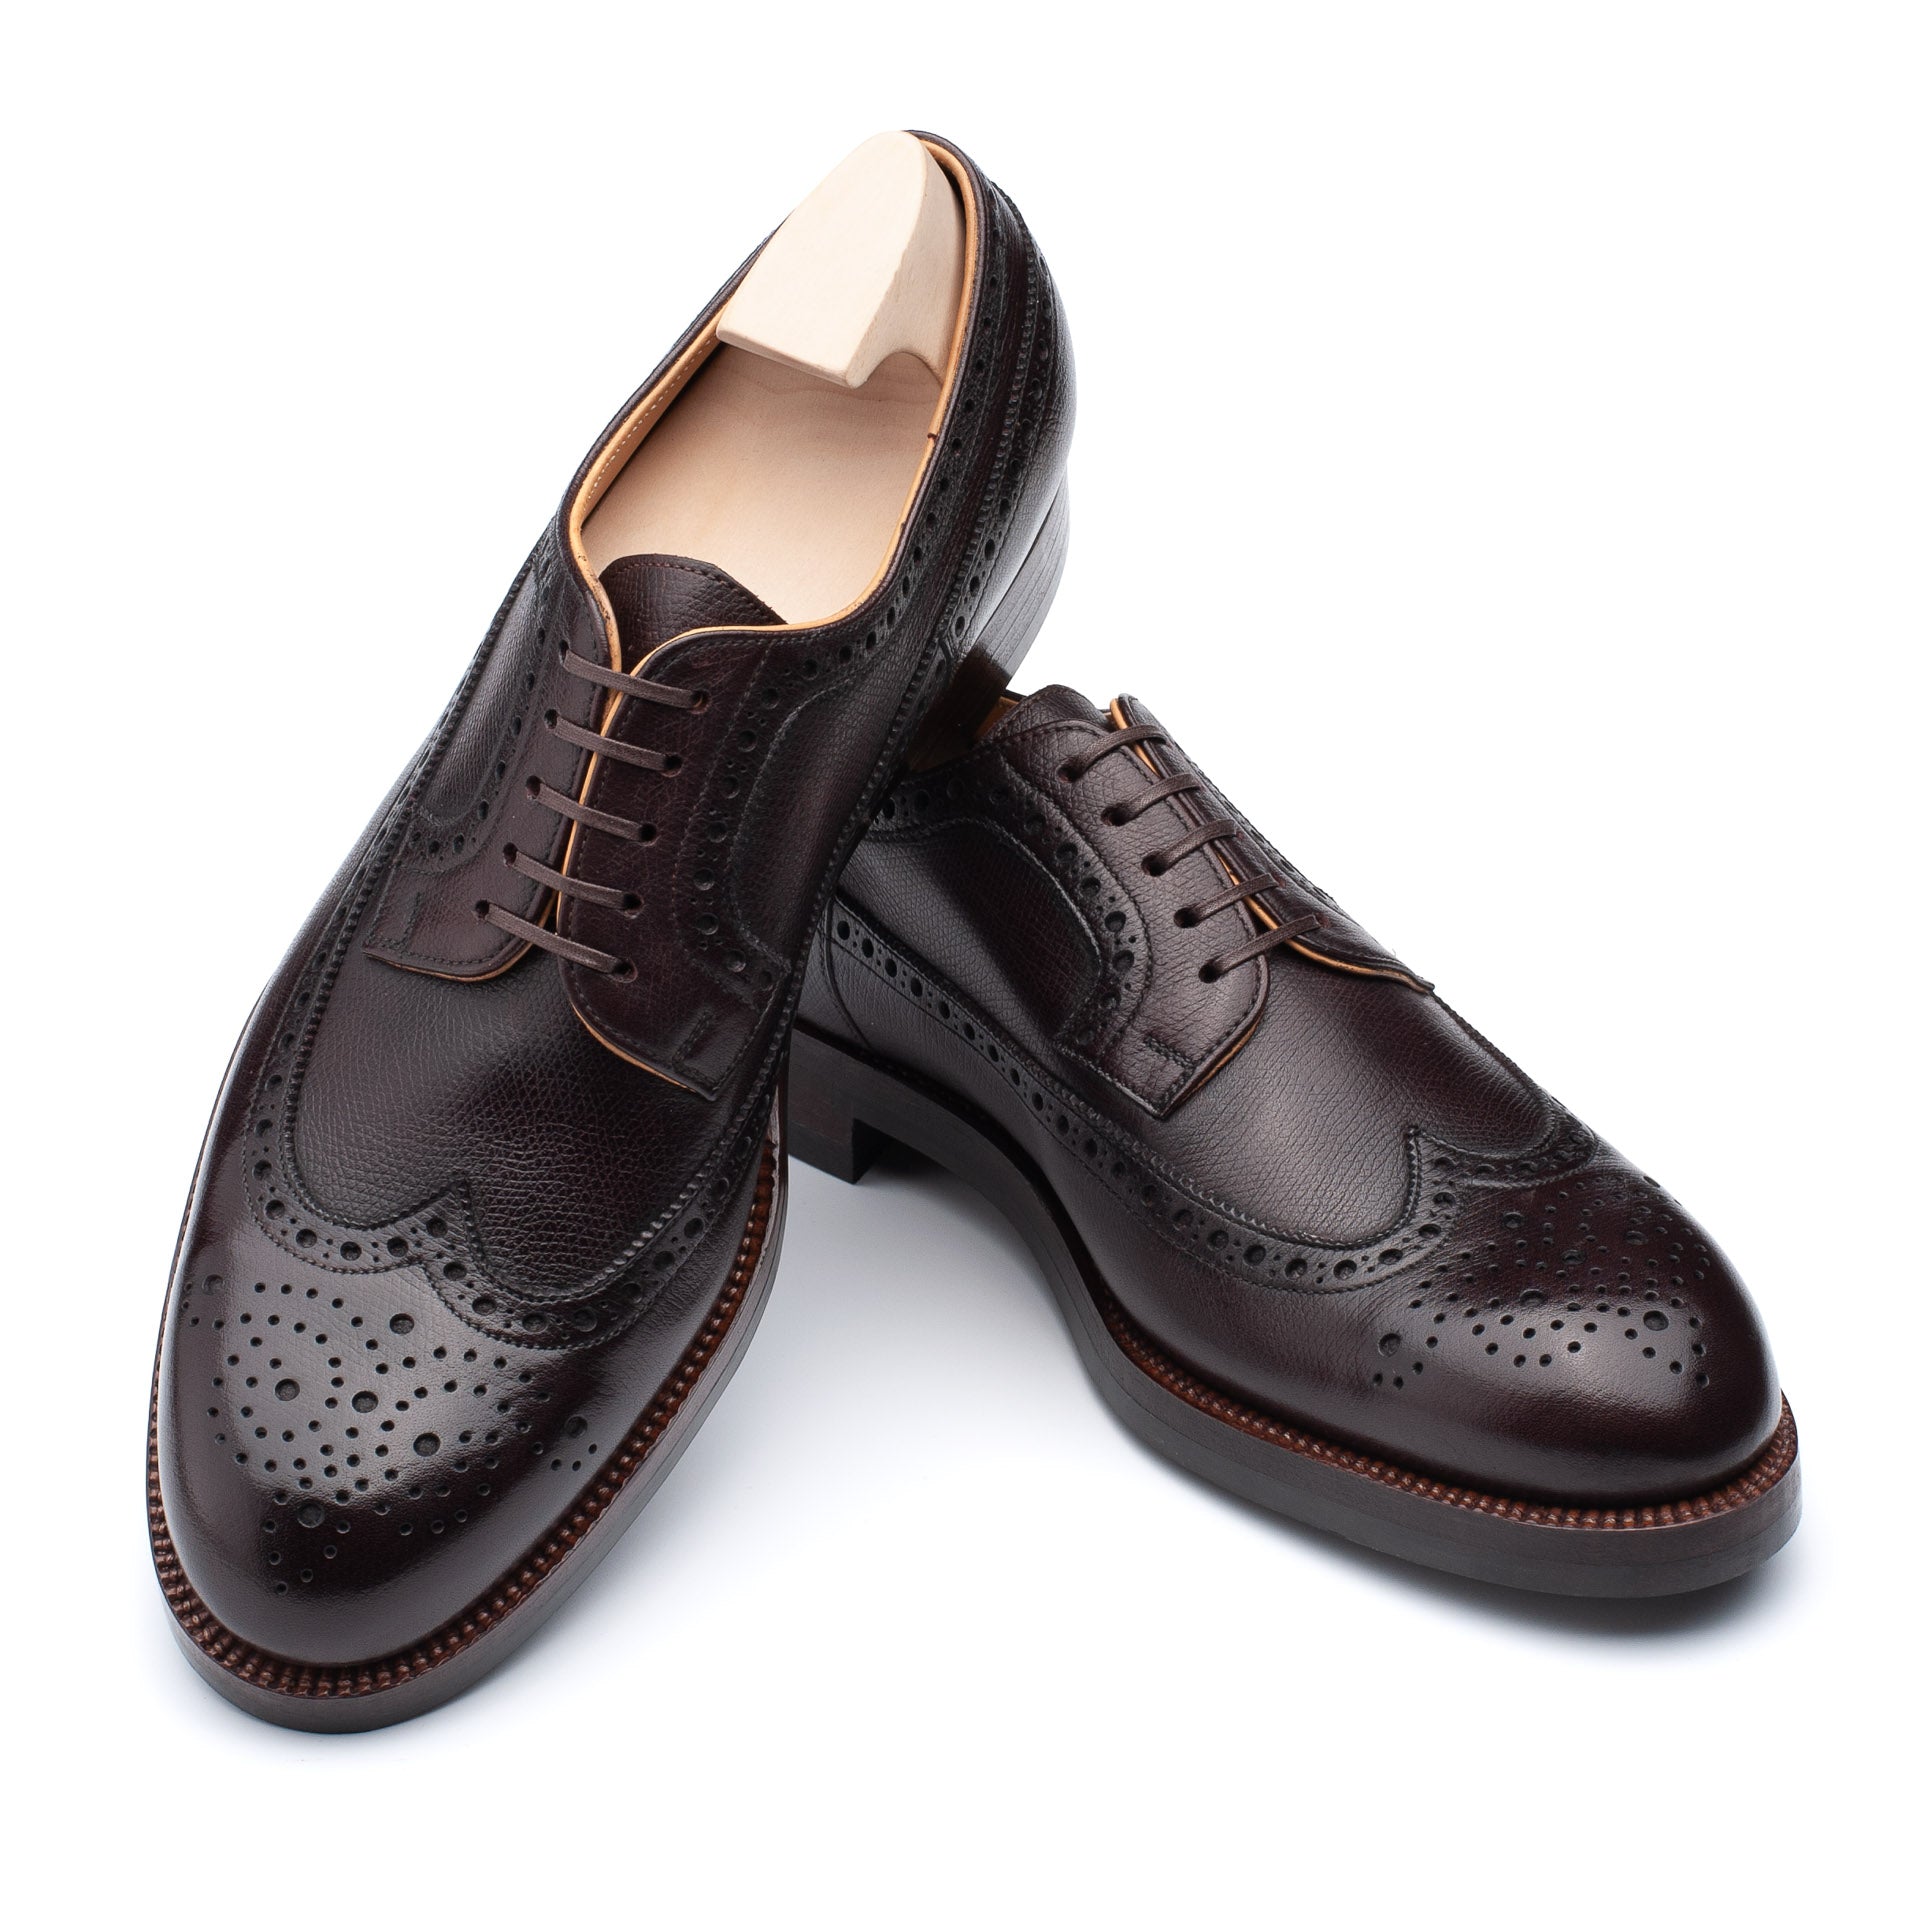 PASSUS SHOES Handmade "Robert"  Longwing "Russia Calf" Derby Shoes 11 44